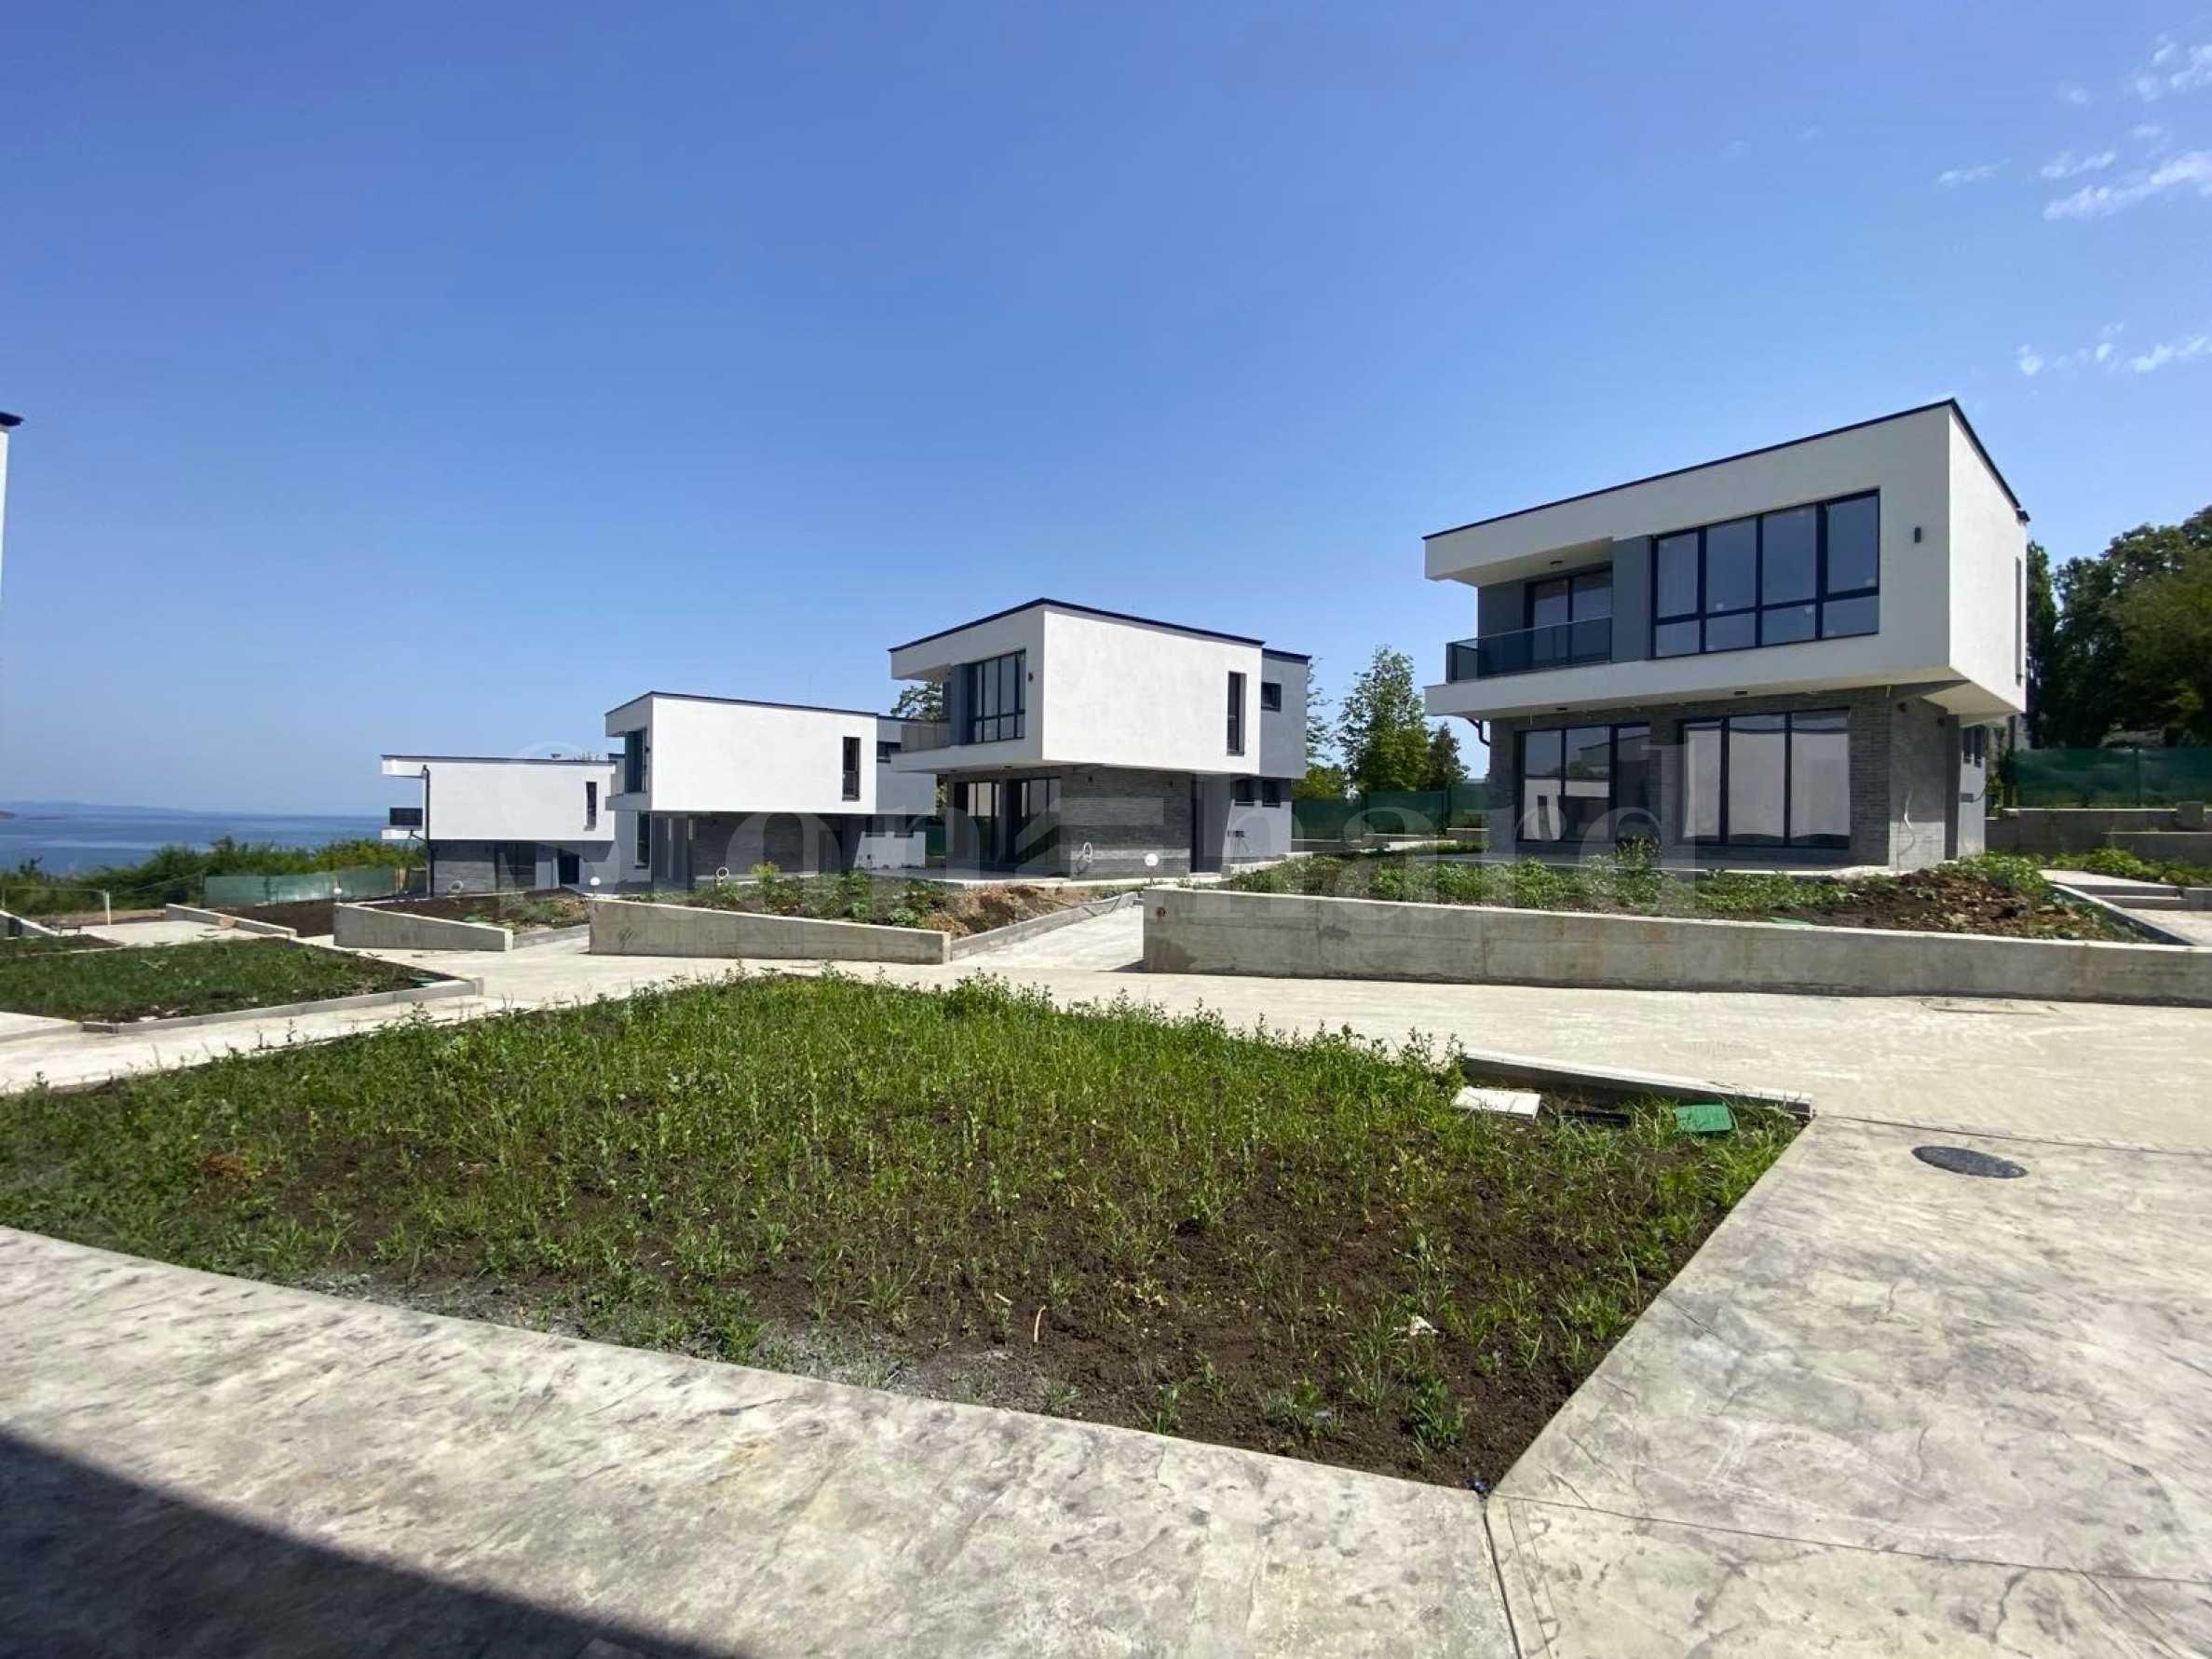 Modern new construction houses 100 m from the beach1 - Stonehard